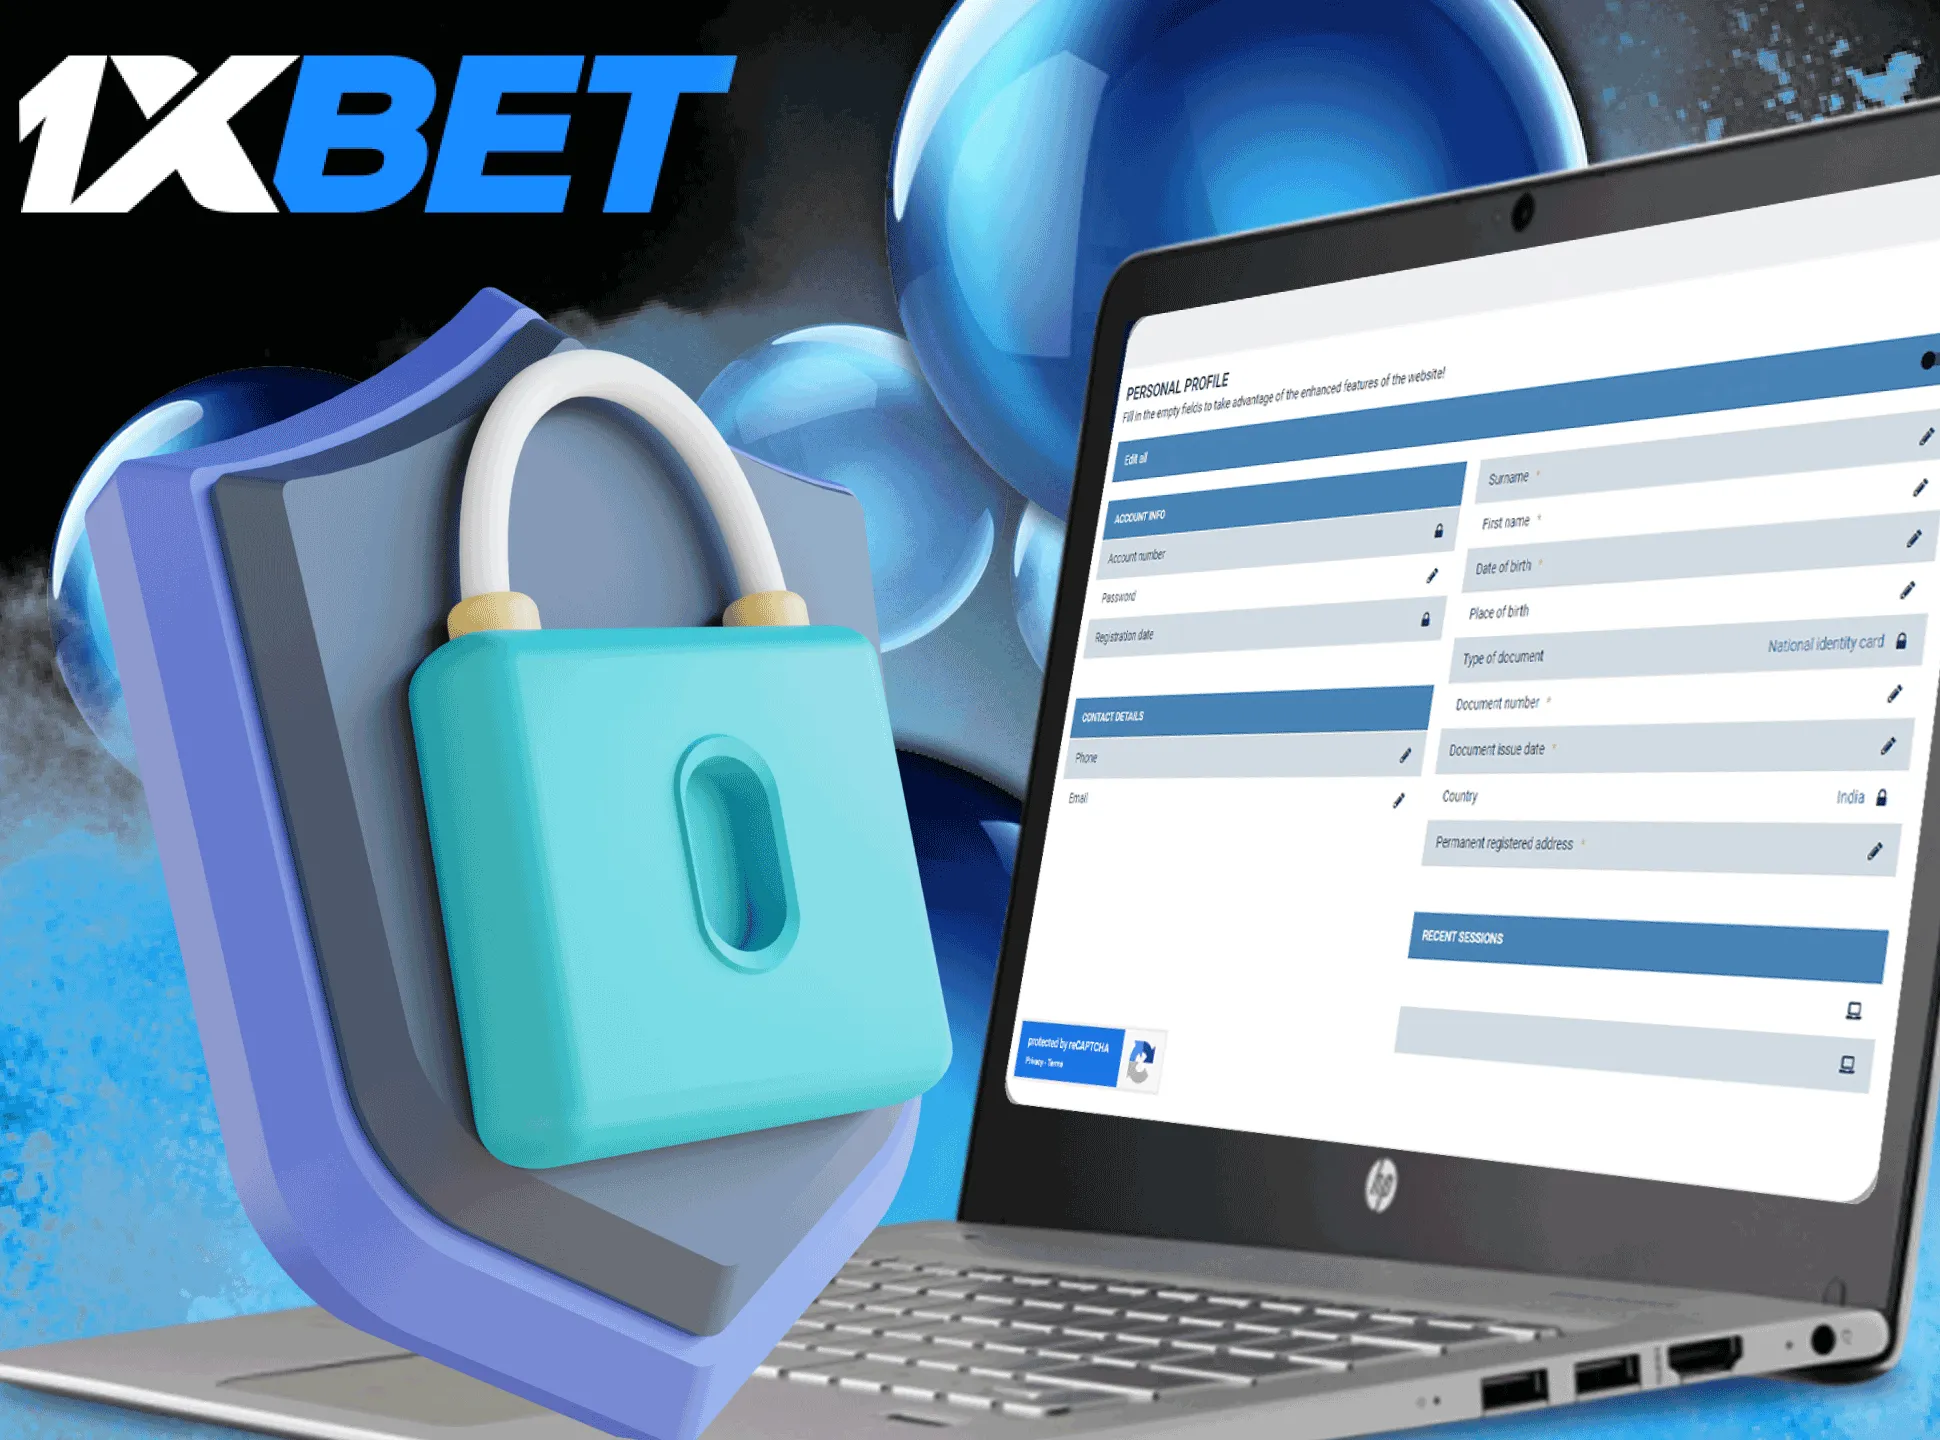 Verification is a necessary procedure on the 1xbet site.